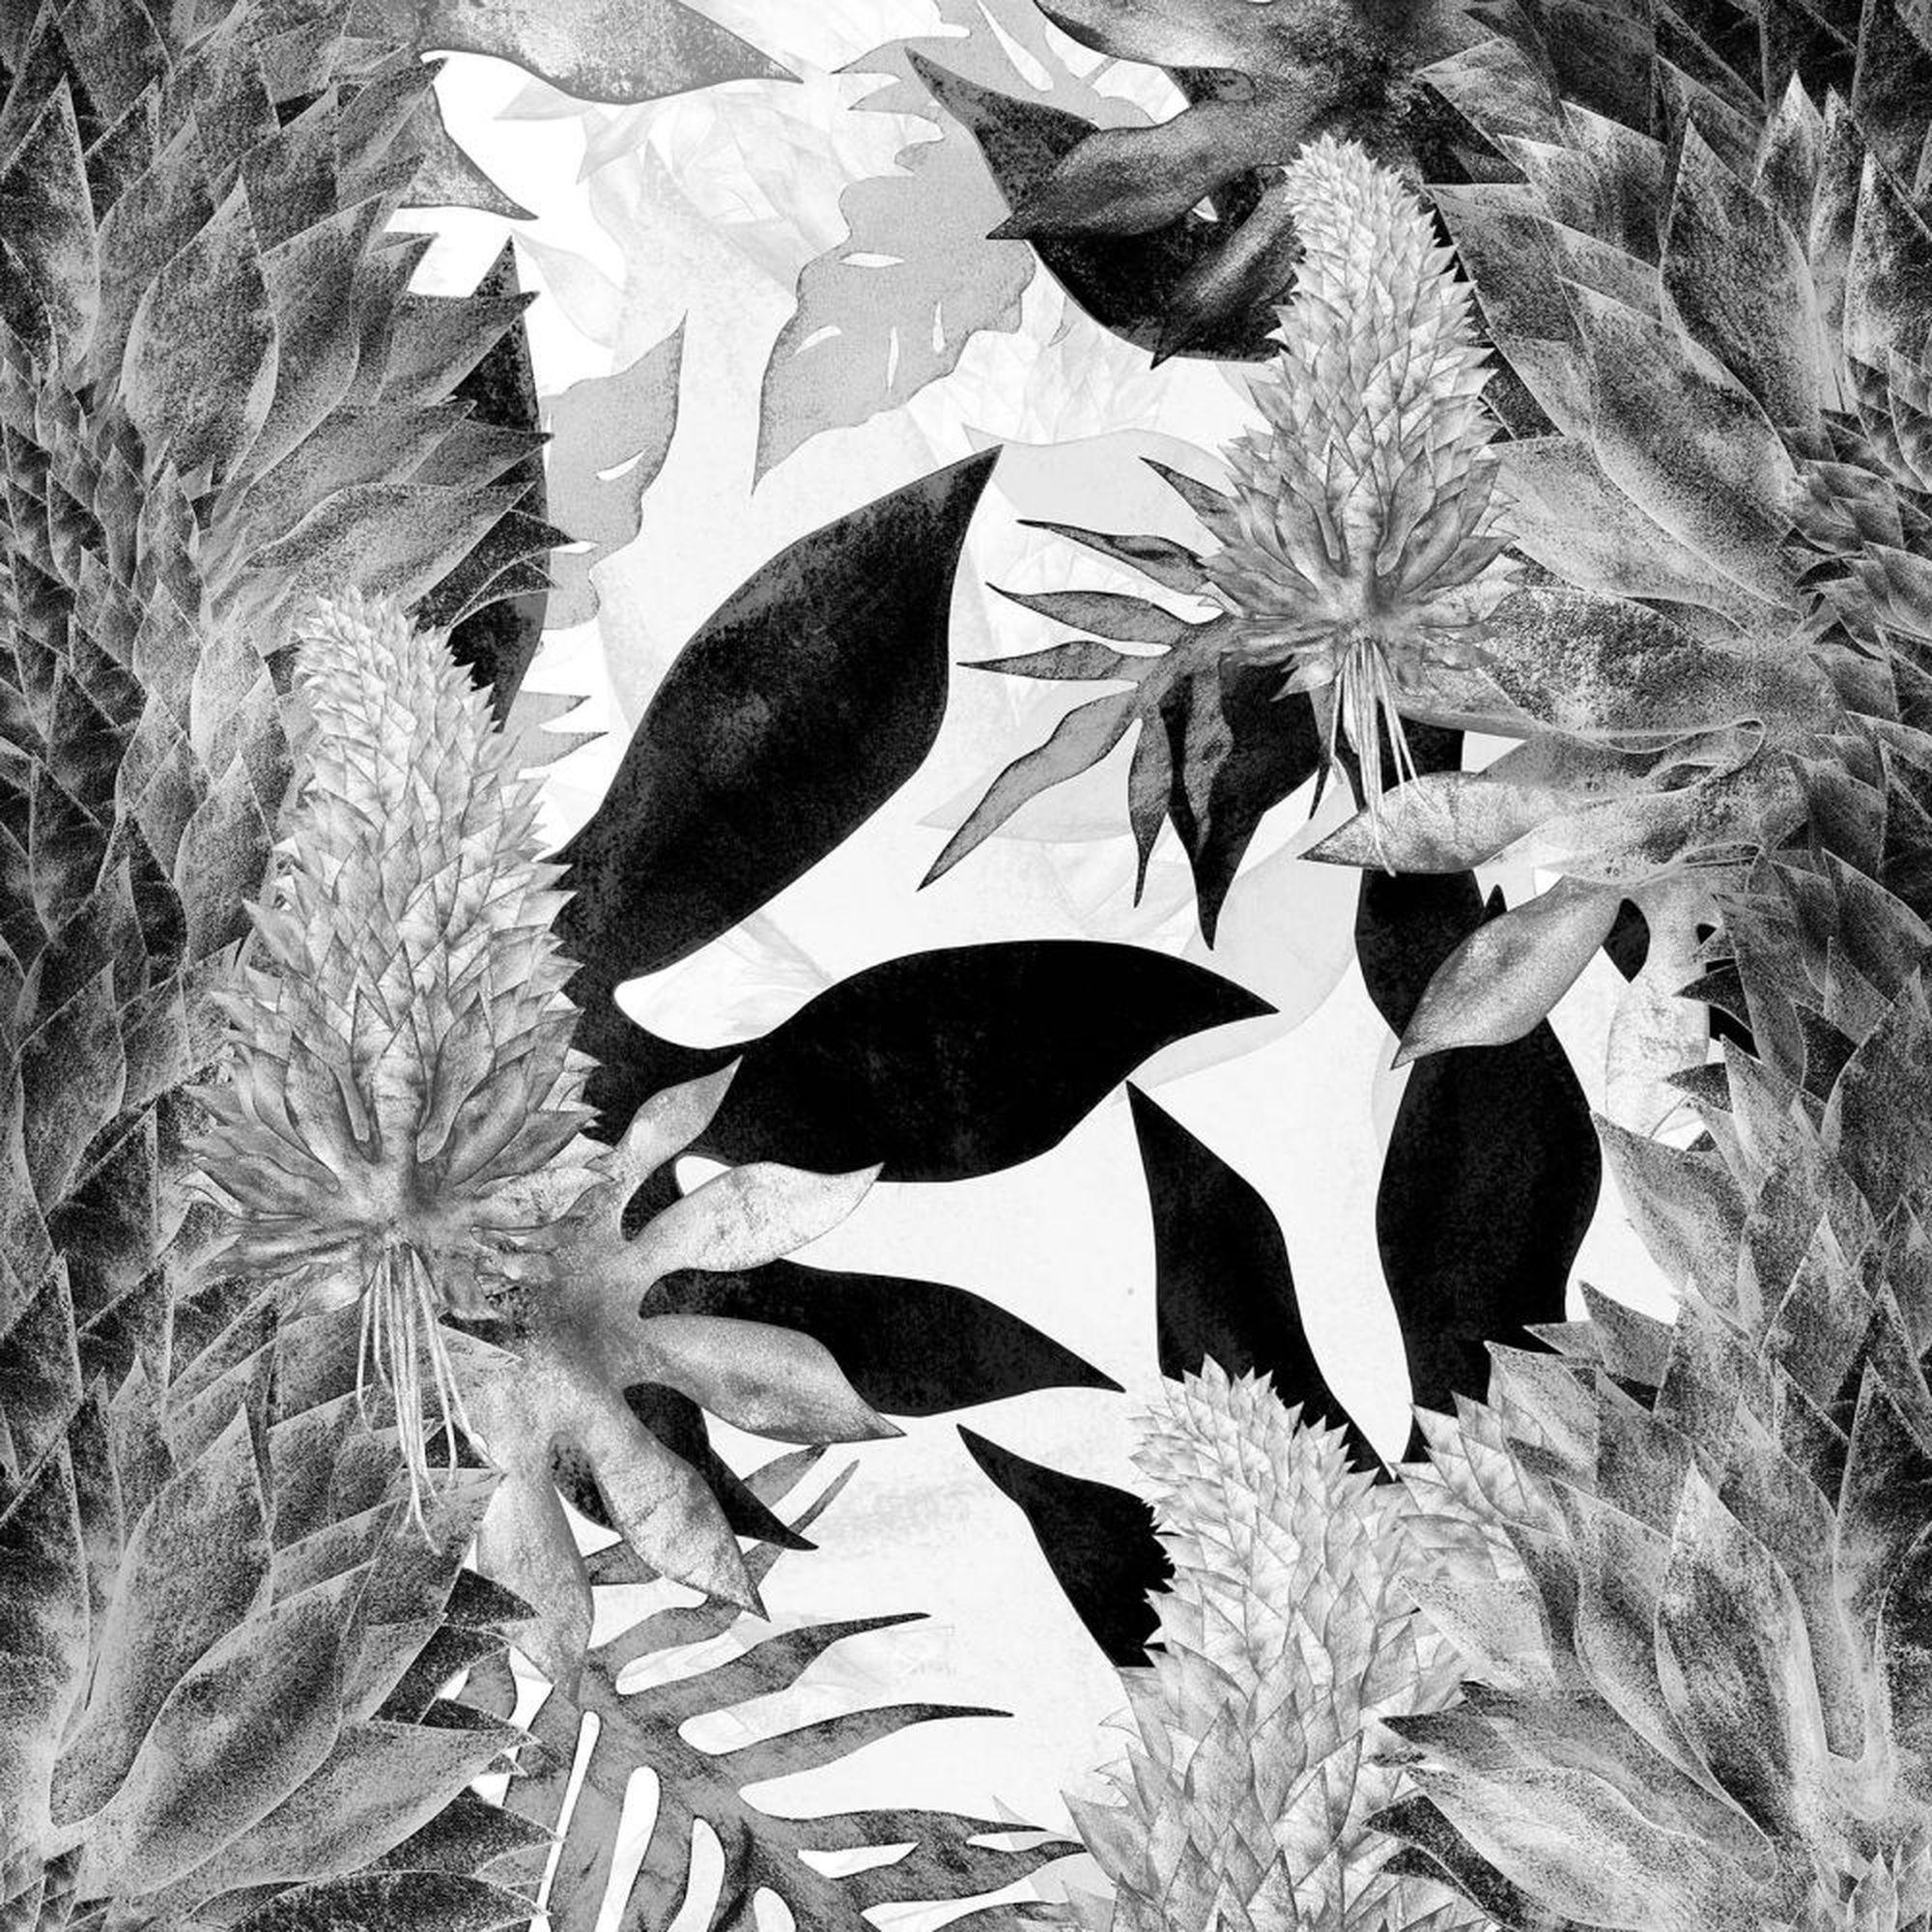 Black and White Tropical Wallpapers - Top Free Black and White Tropical